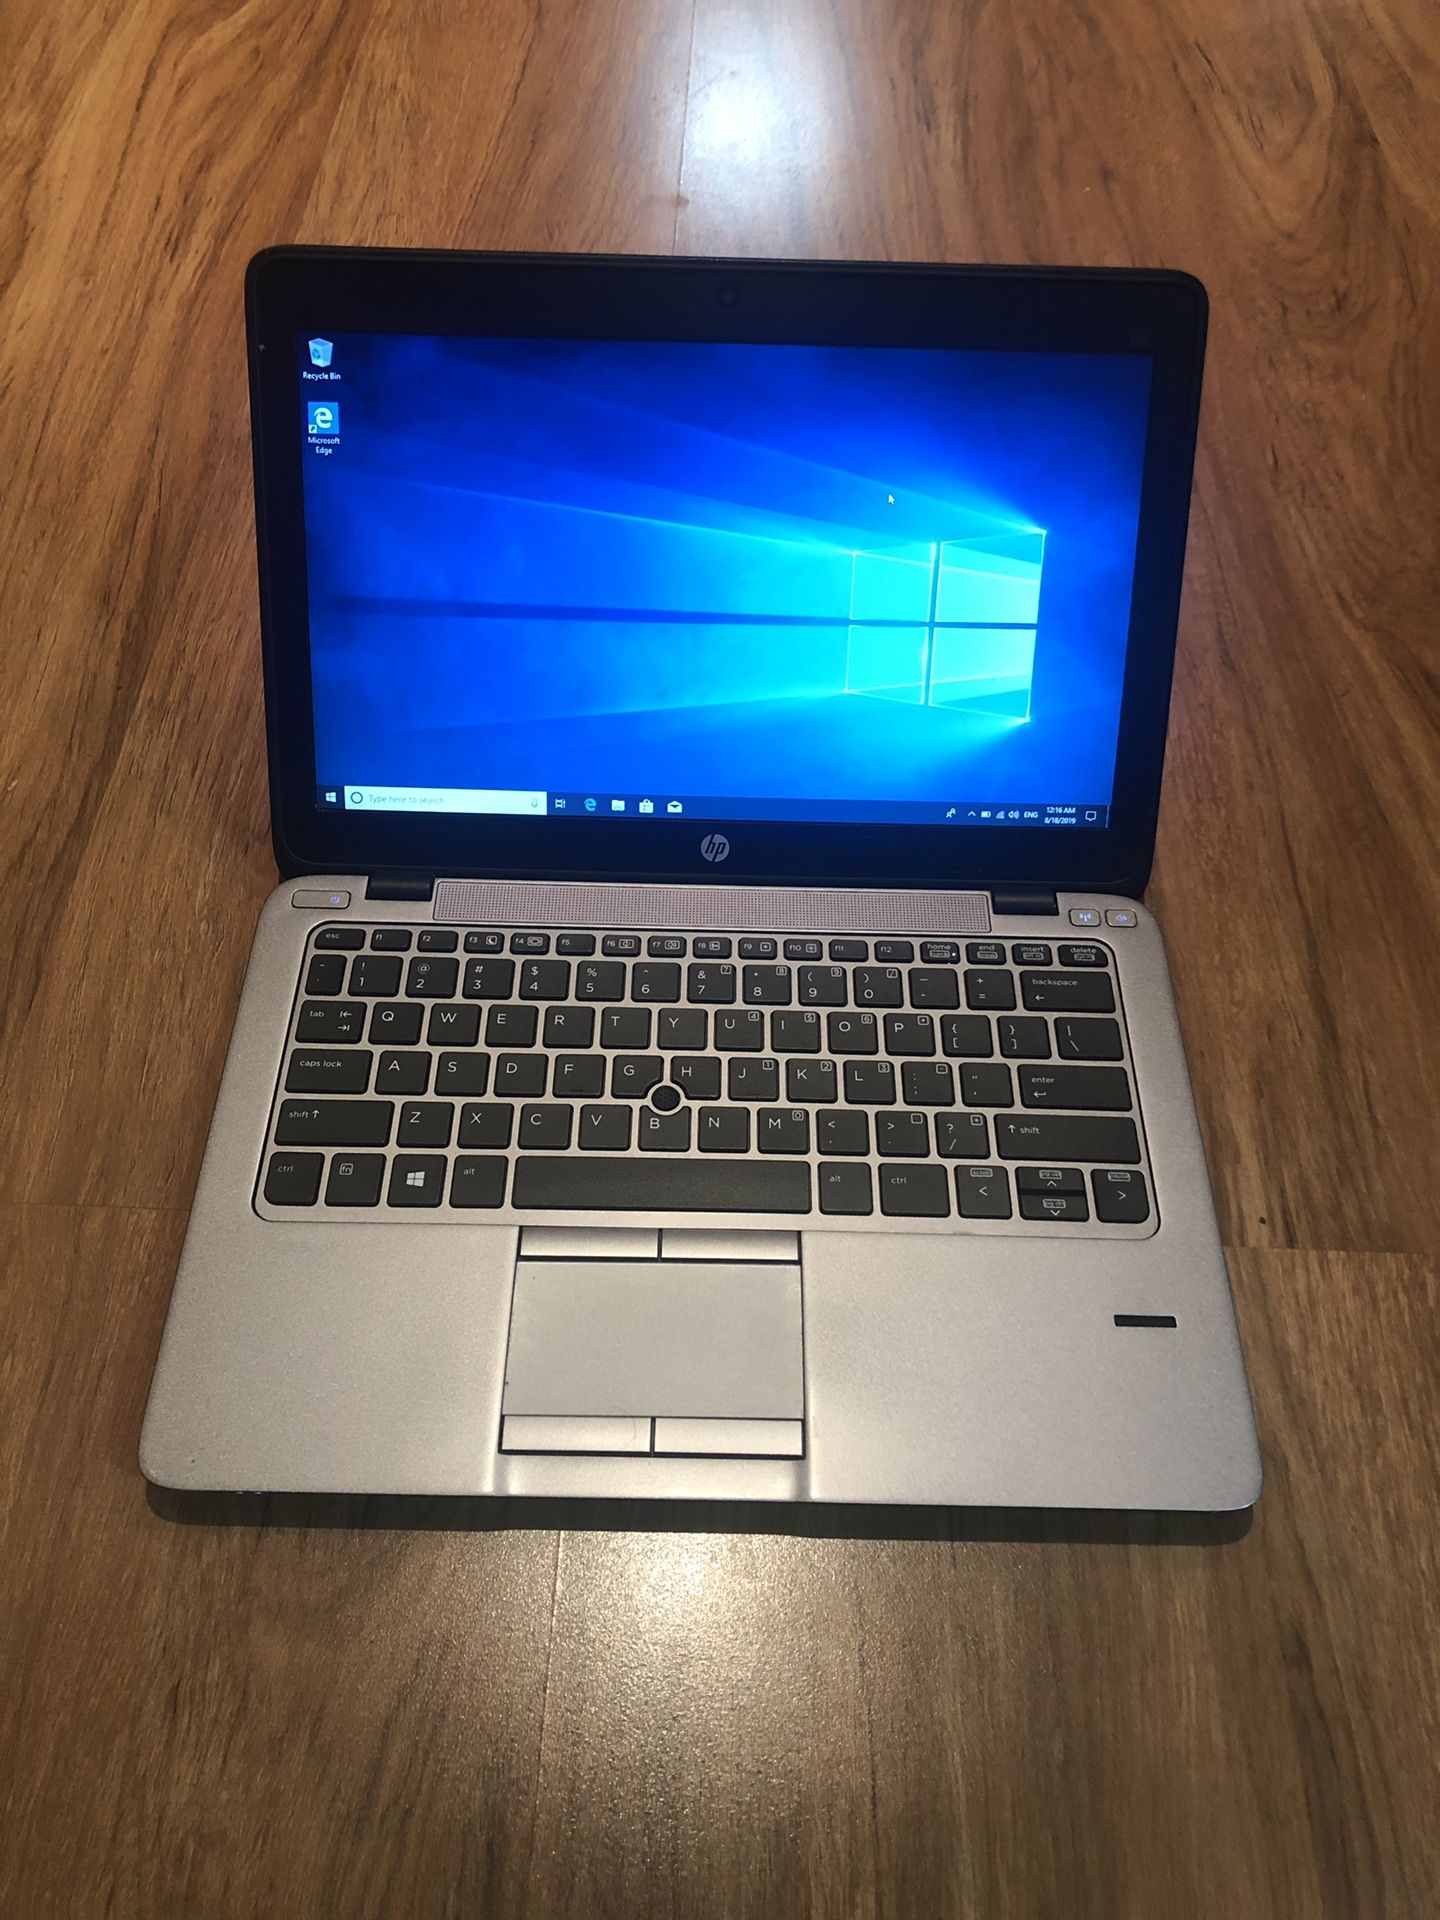 Hp Elitebook 725 G2 4GB Ram 500GB Hard Drive 14.1 inch Windows 10 Pro Laptop with charger in Excellent Working condition!!!!!!!! Very Fast and light